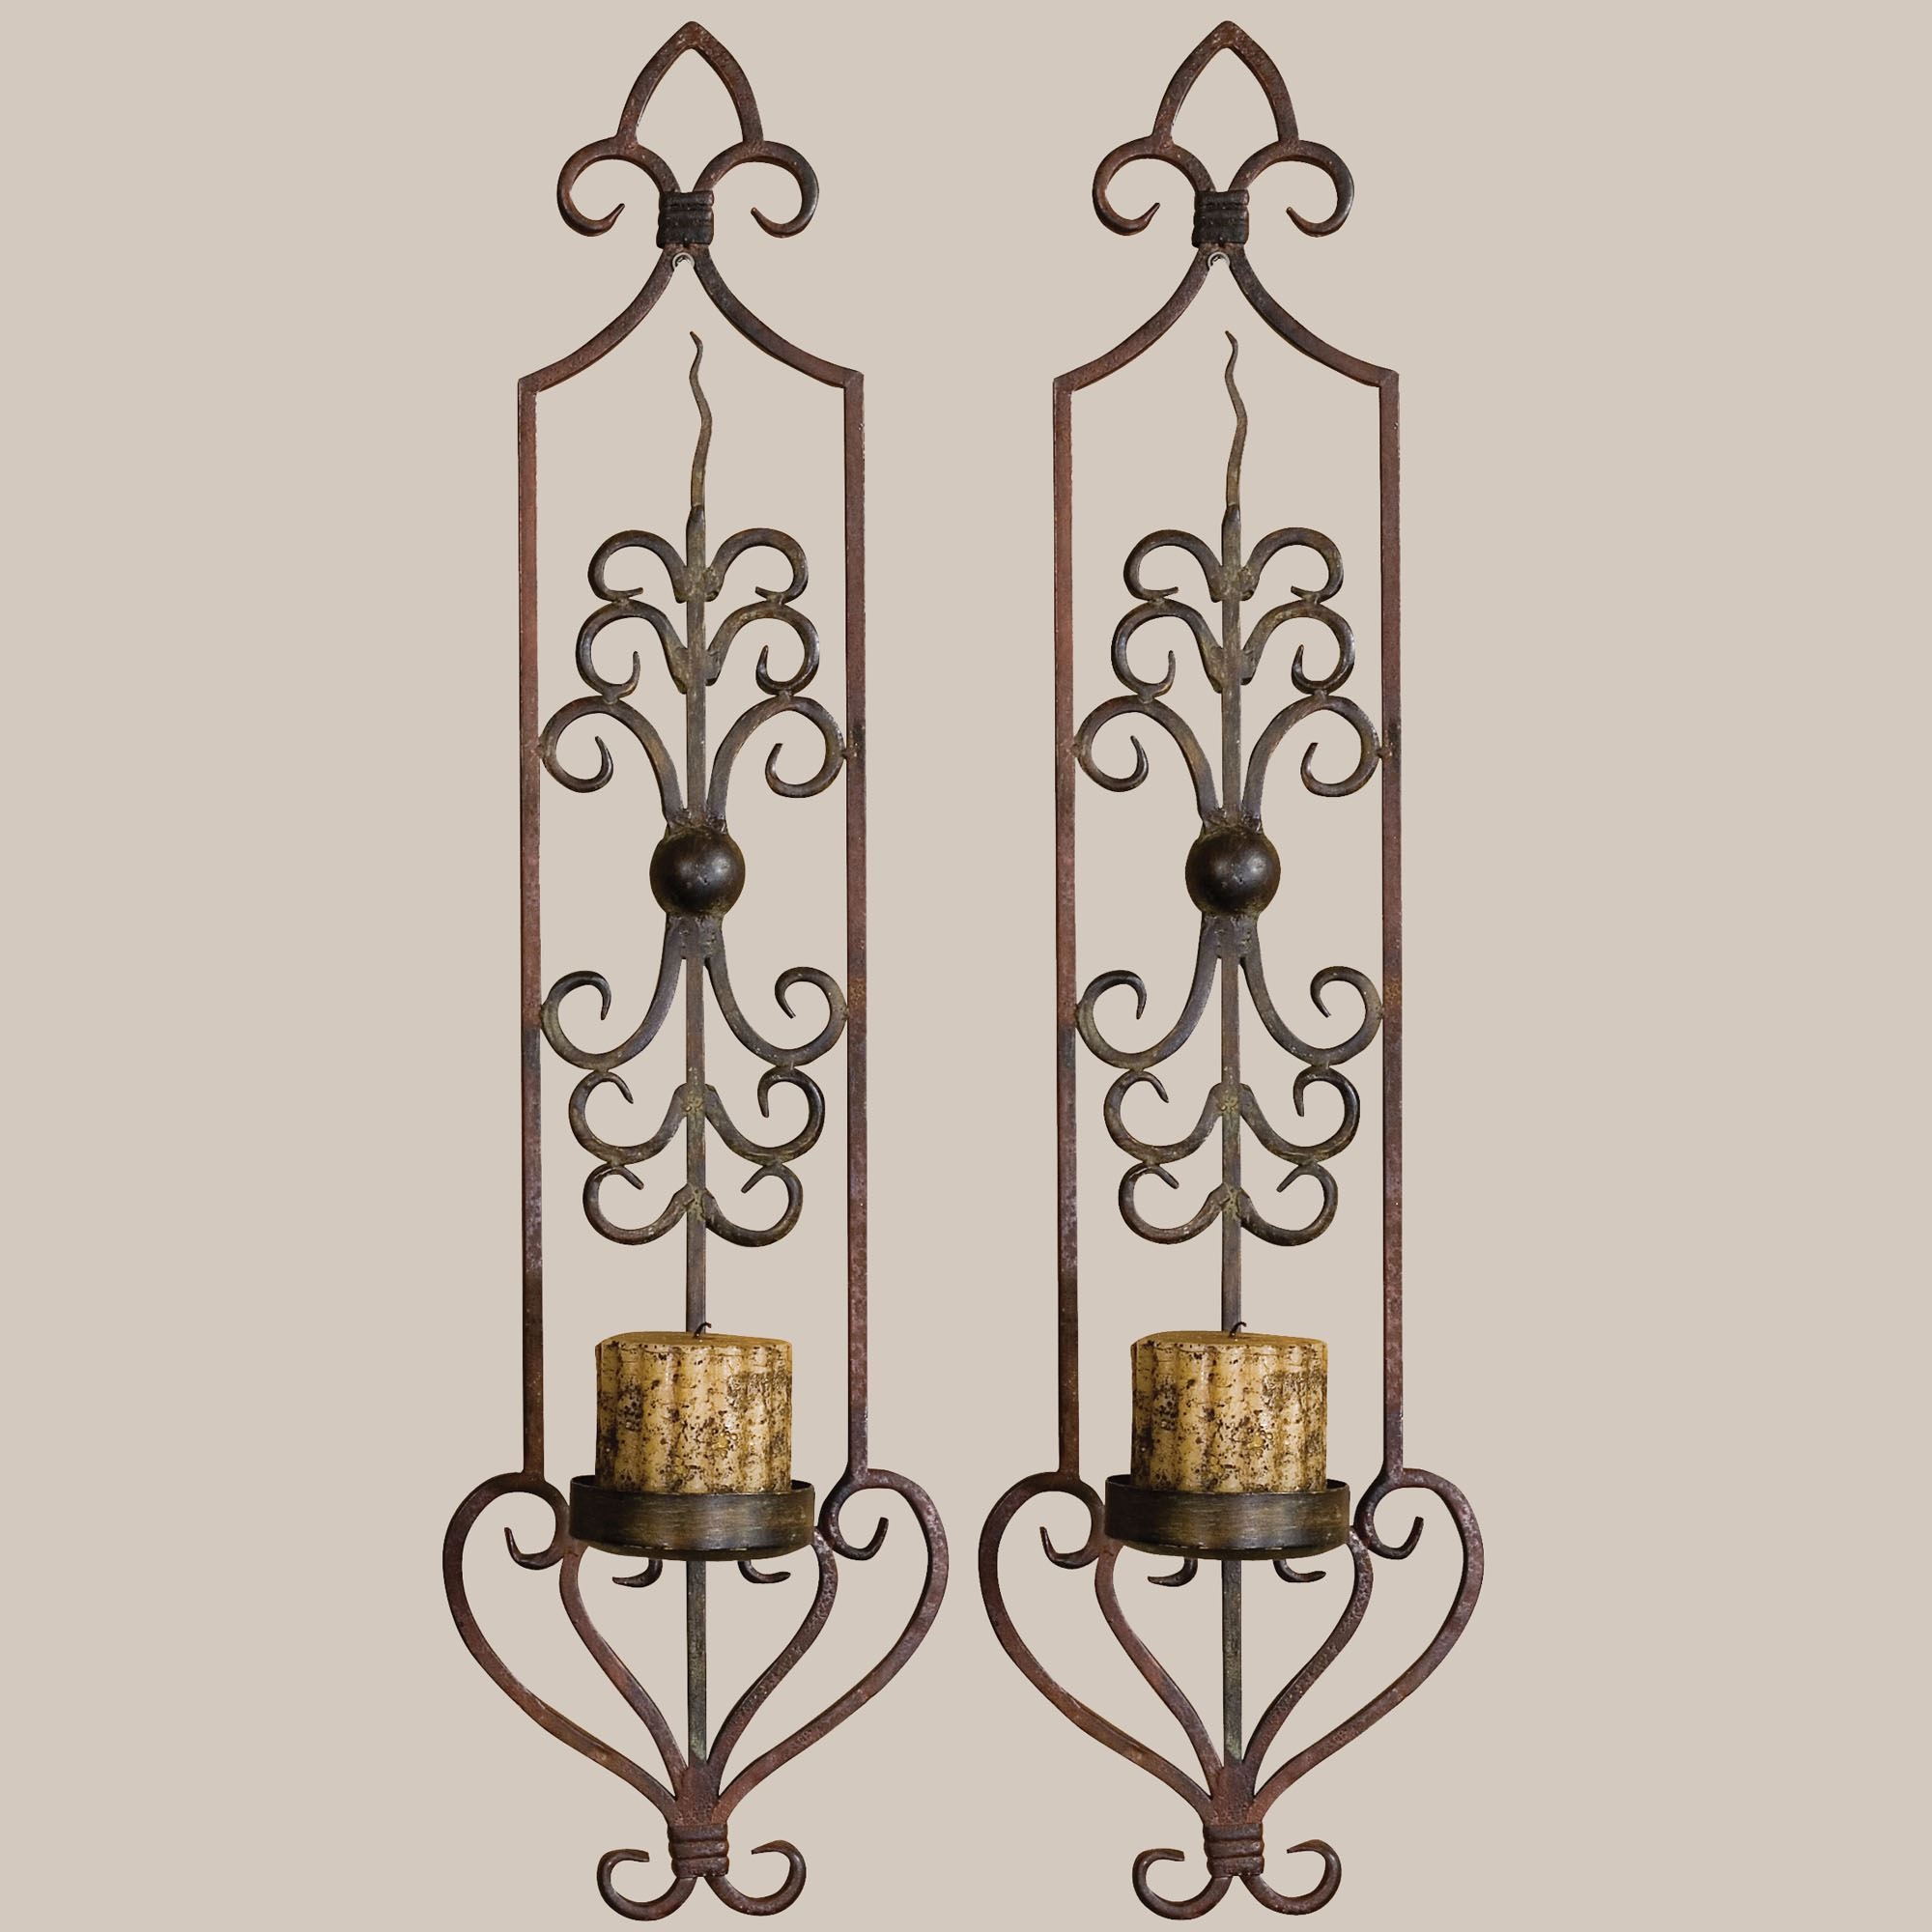 Tuscan wrought iron metal wall candle holder sconce set